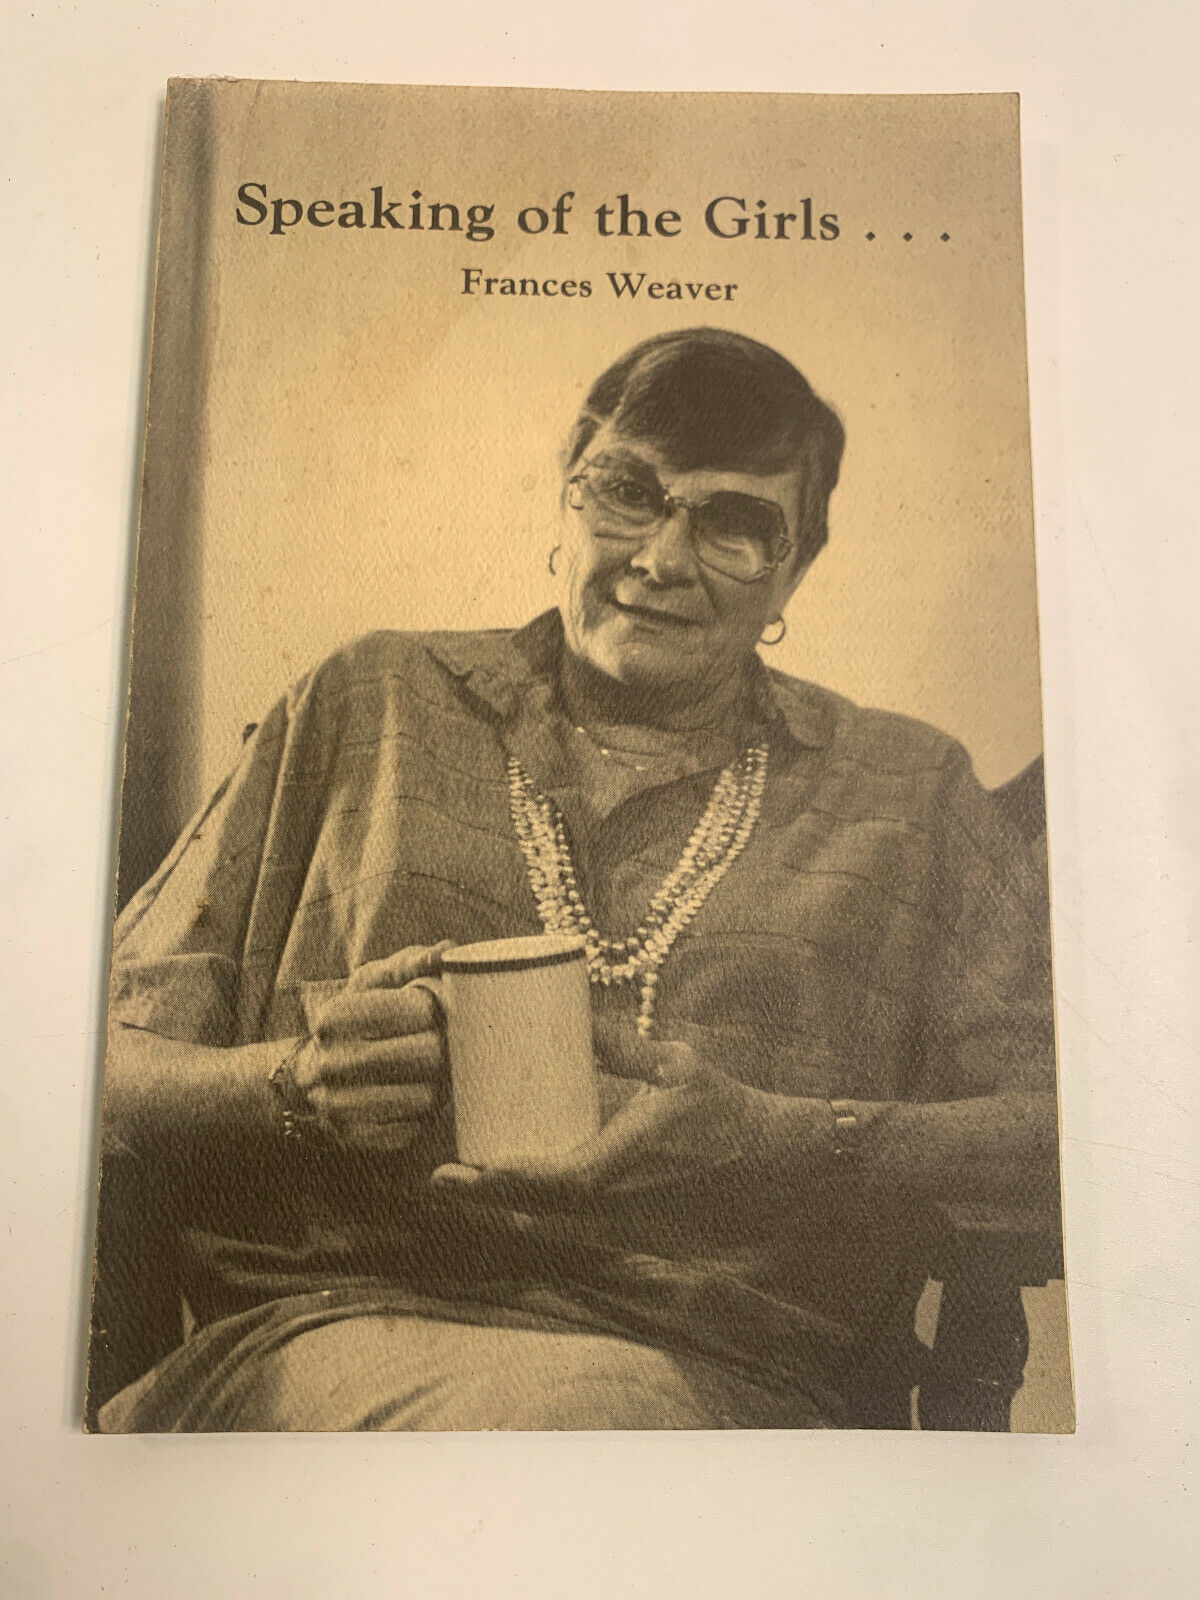 Speaking of the Girls . . . by Frances Weaver 1986